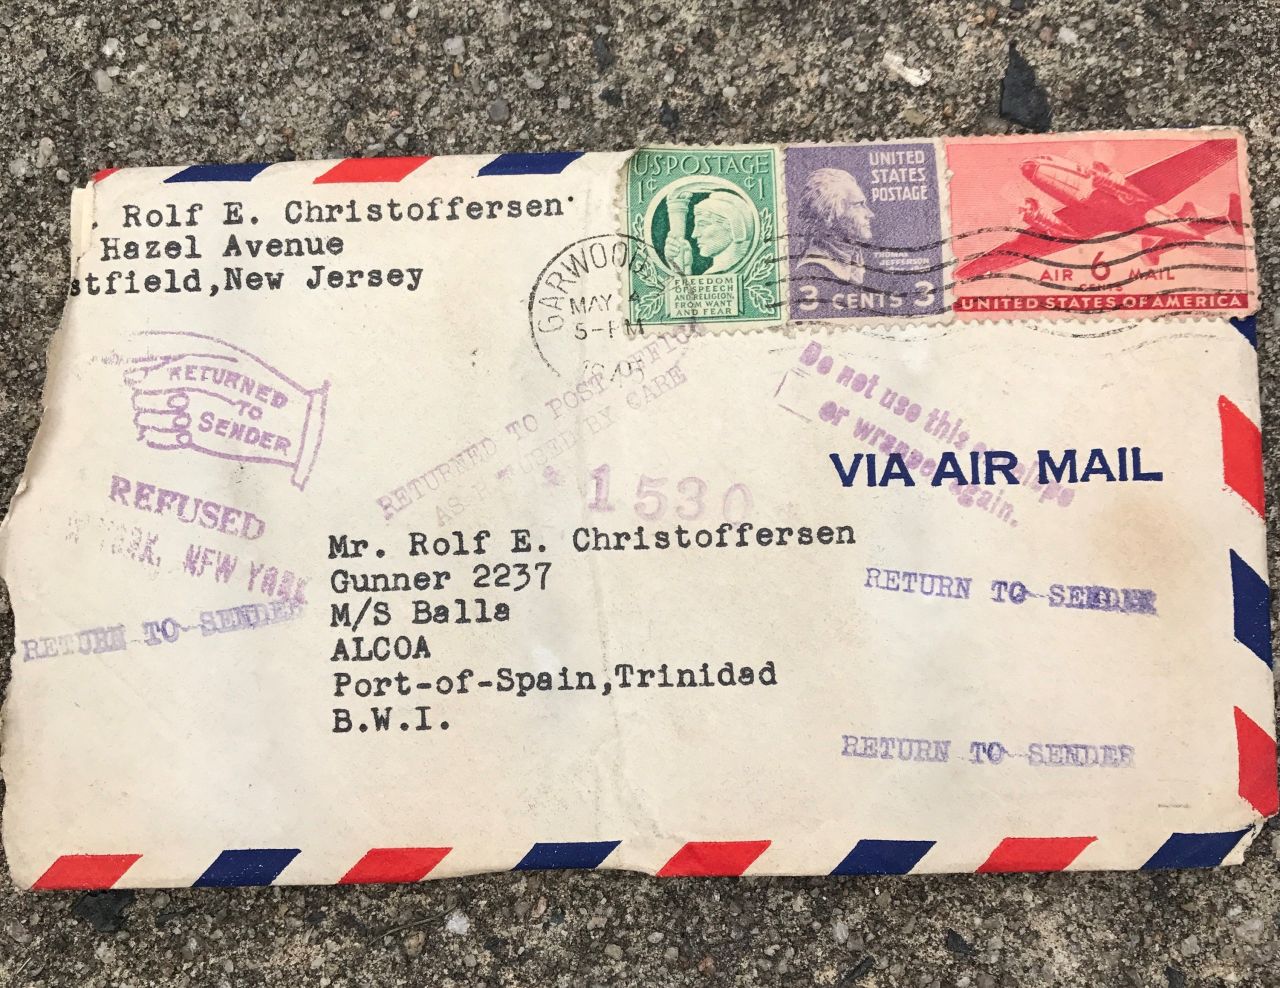 Allen Cook and his daughter, Melissa, found this envelope in the ceiling while renovating her house. It contained a letter typewritten in 1945.